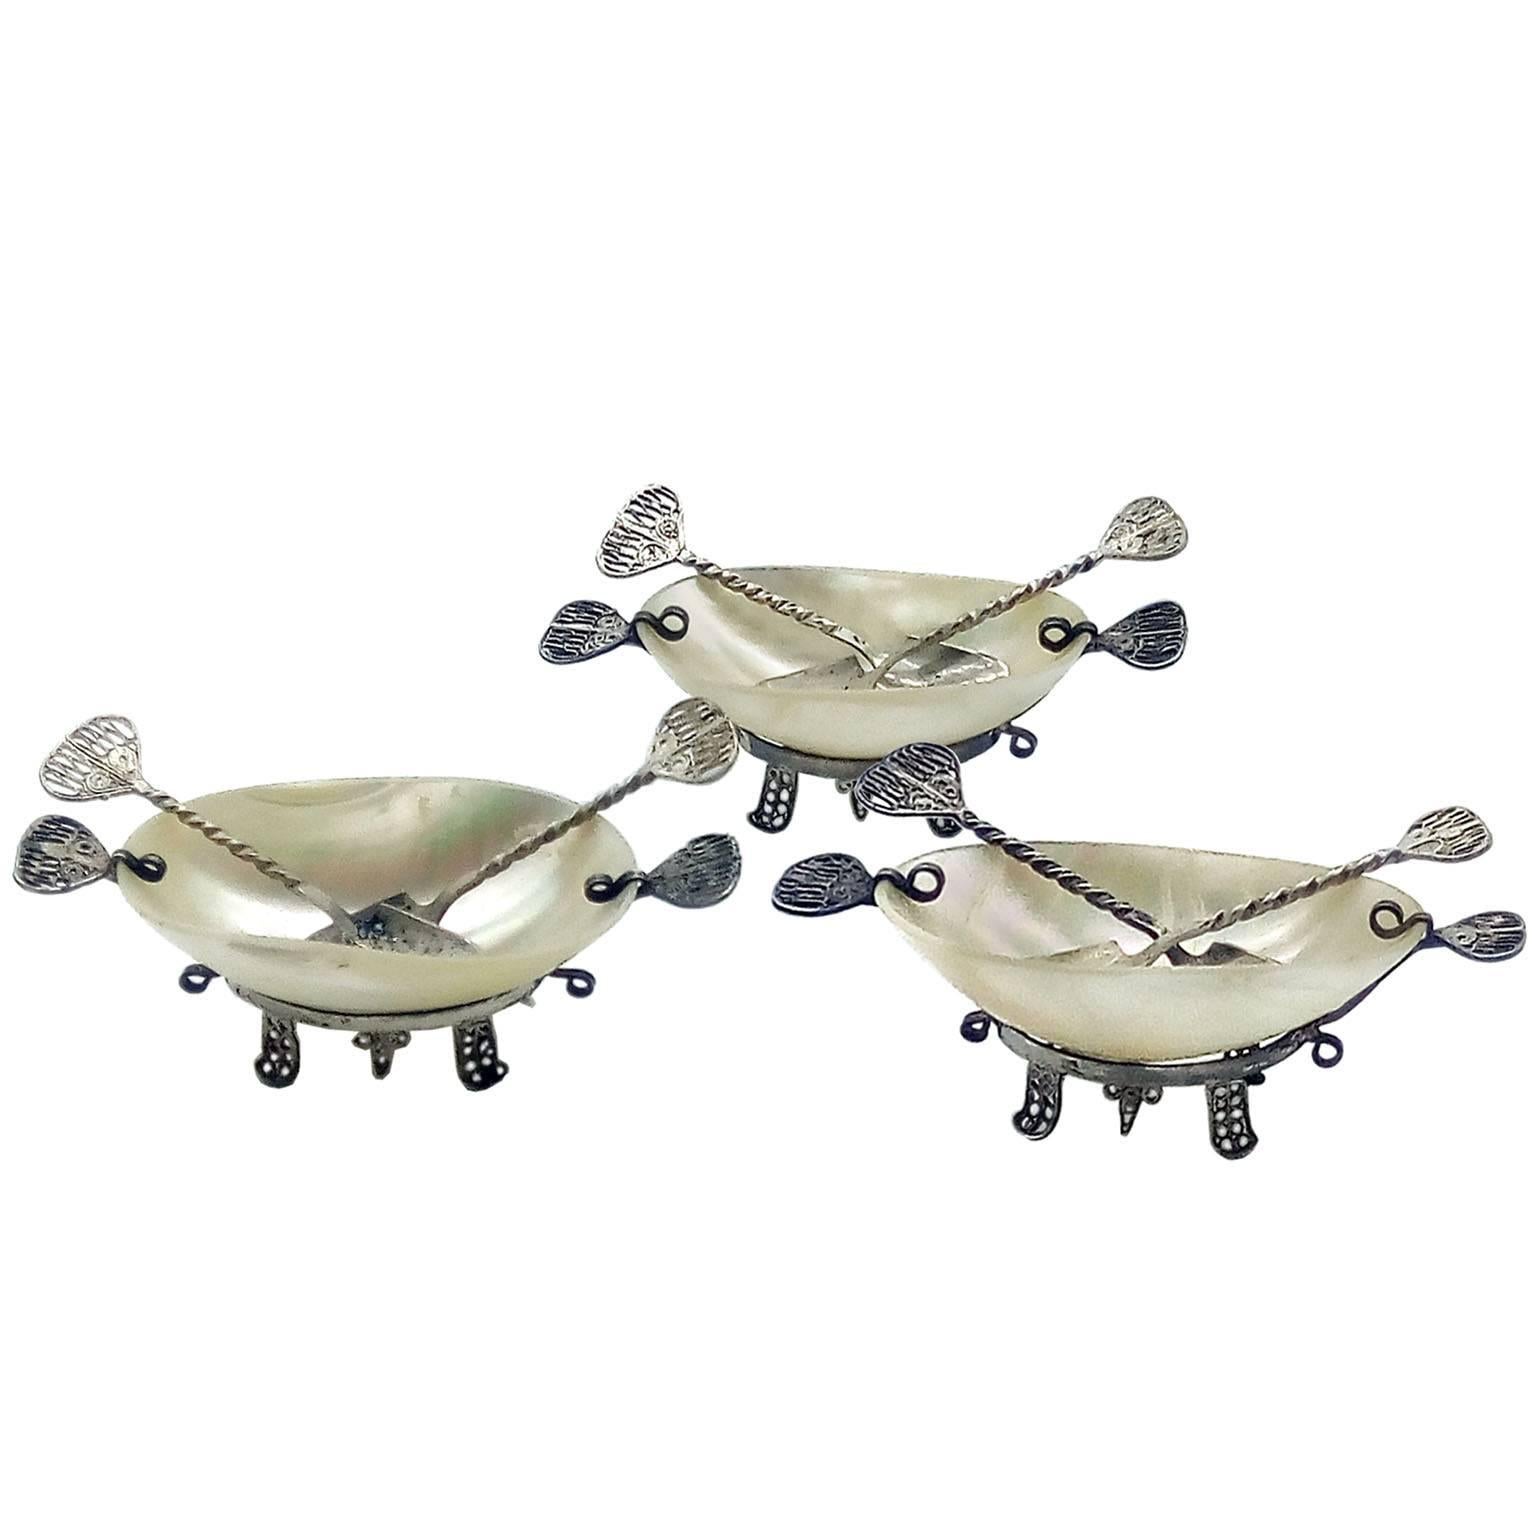 Very Rare Russian Caviar Servers in Mother-of-Pearl and Silver